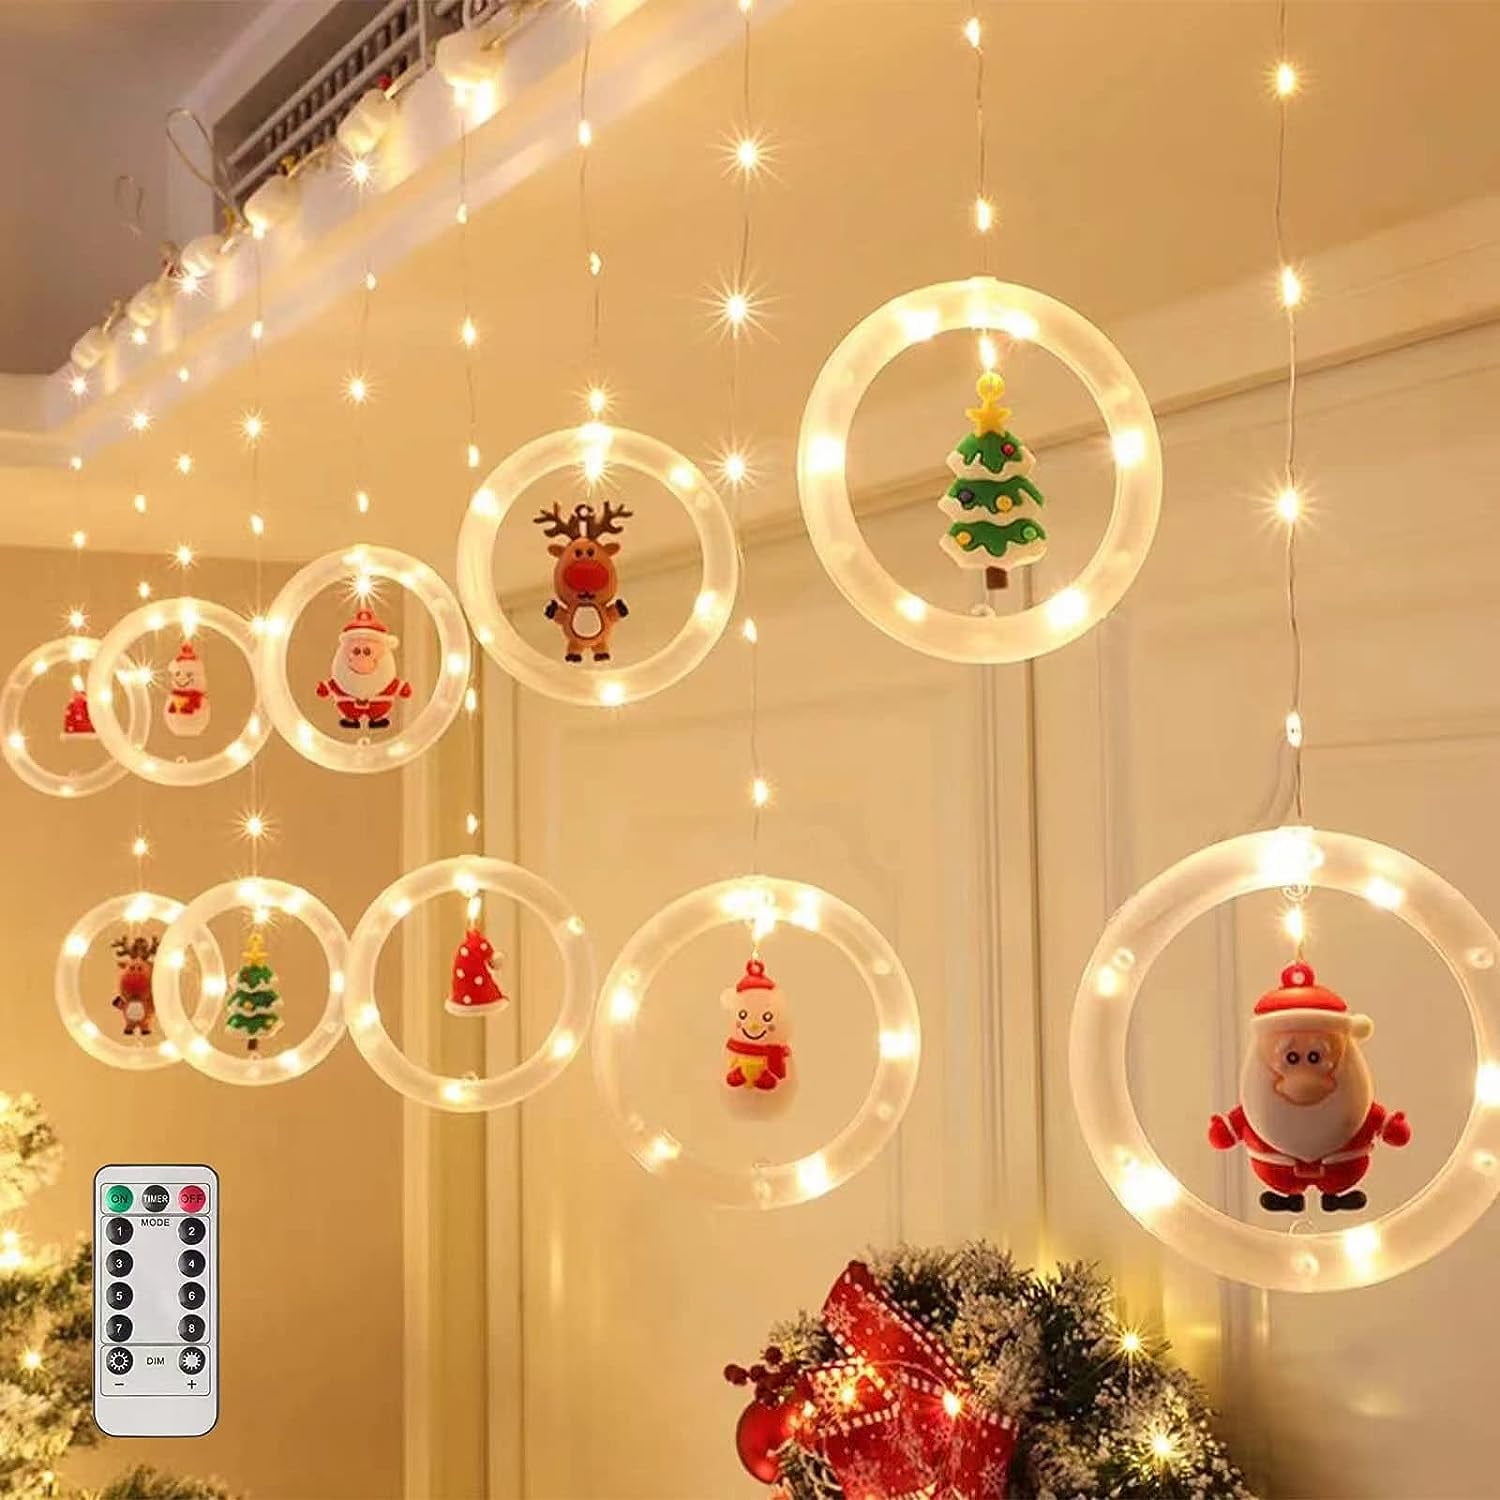 9 Creative Ways to Use Battery Operated LED Lights in Your Home Decor